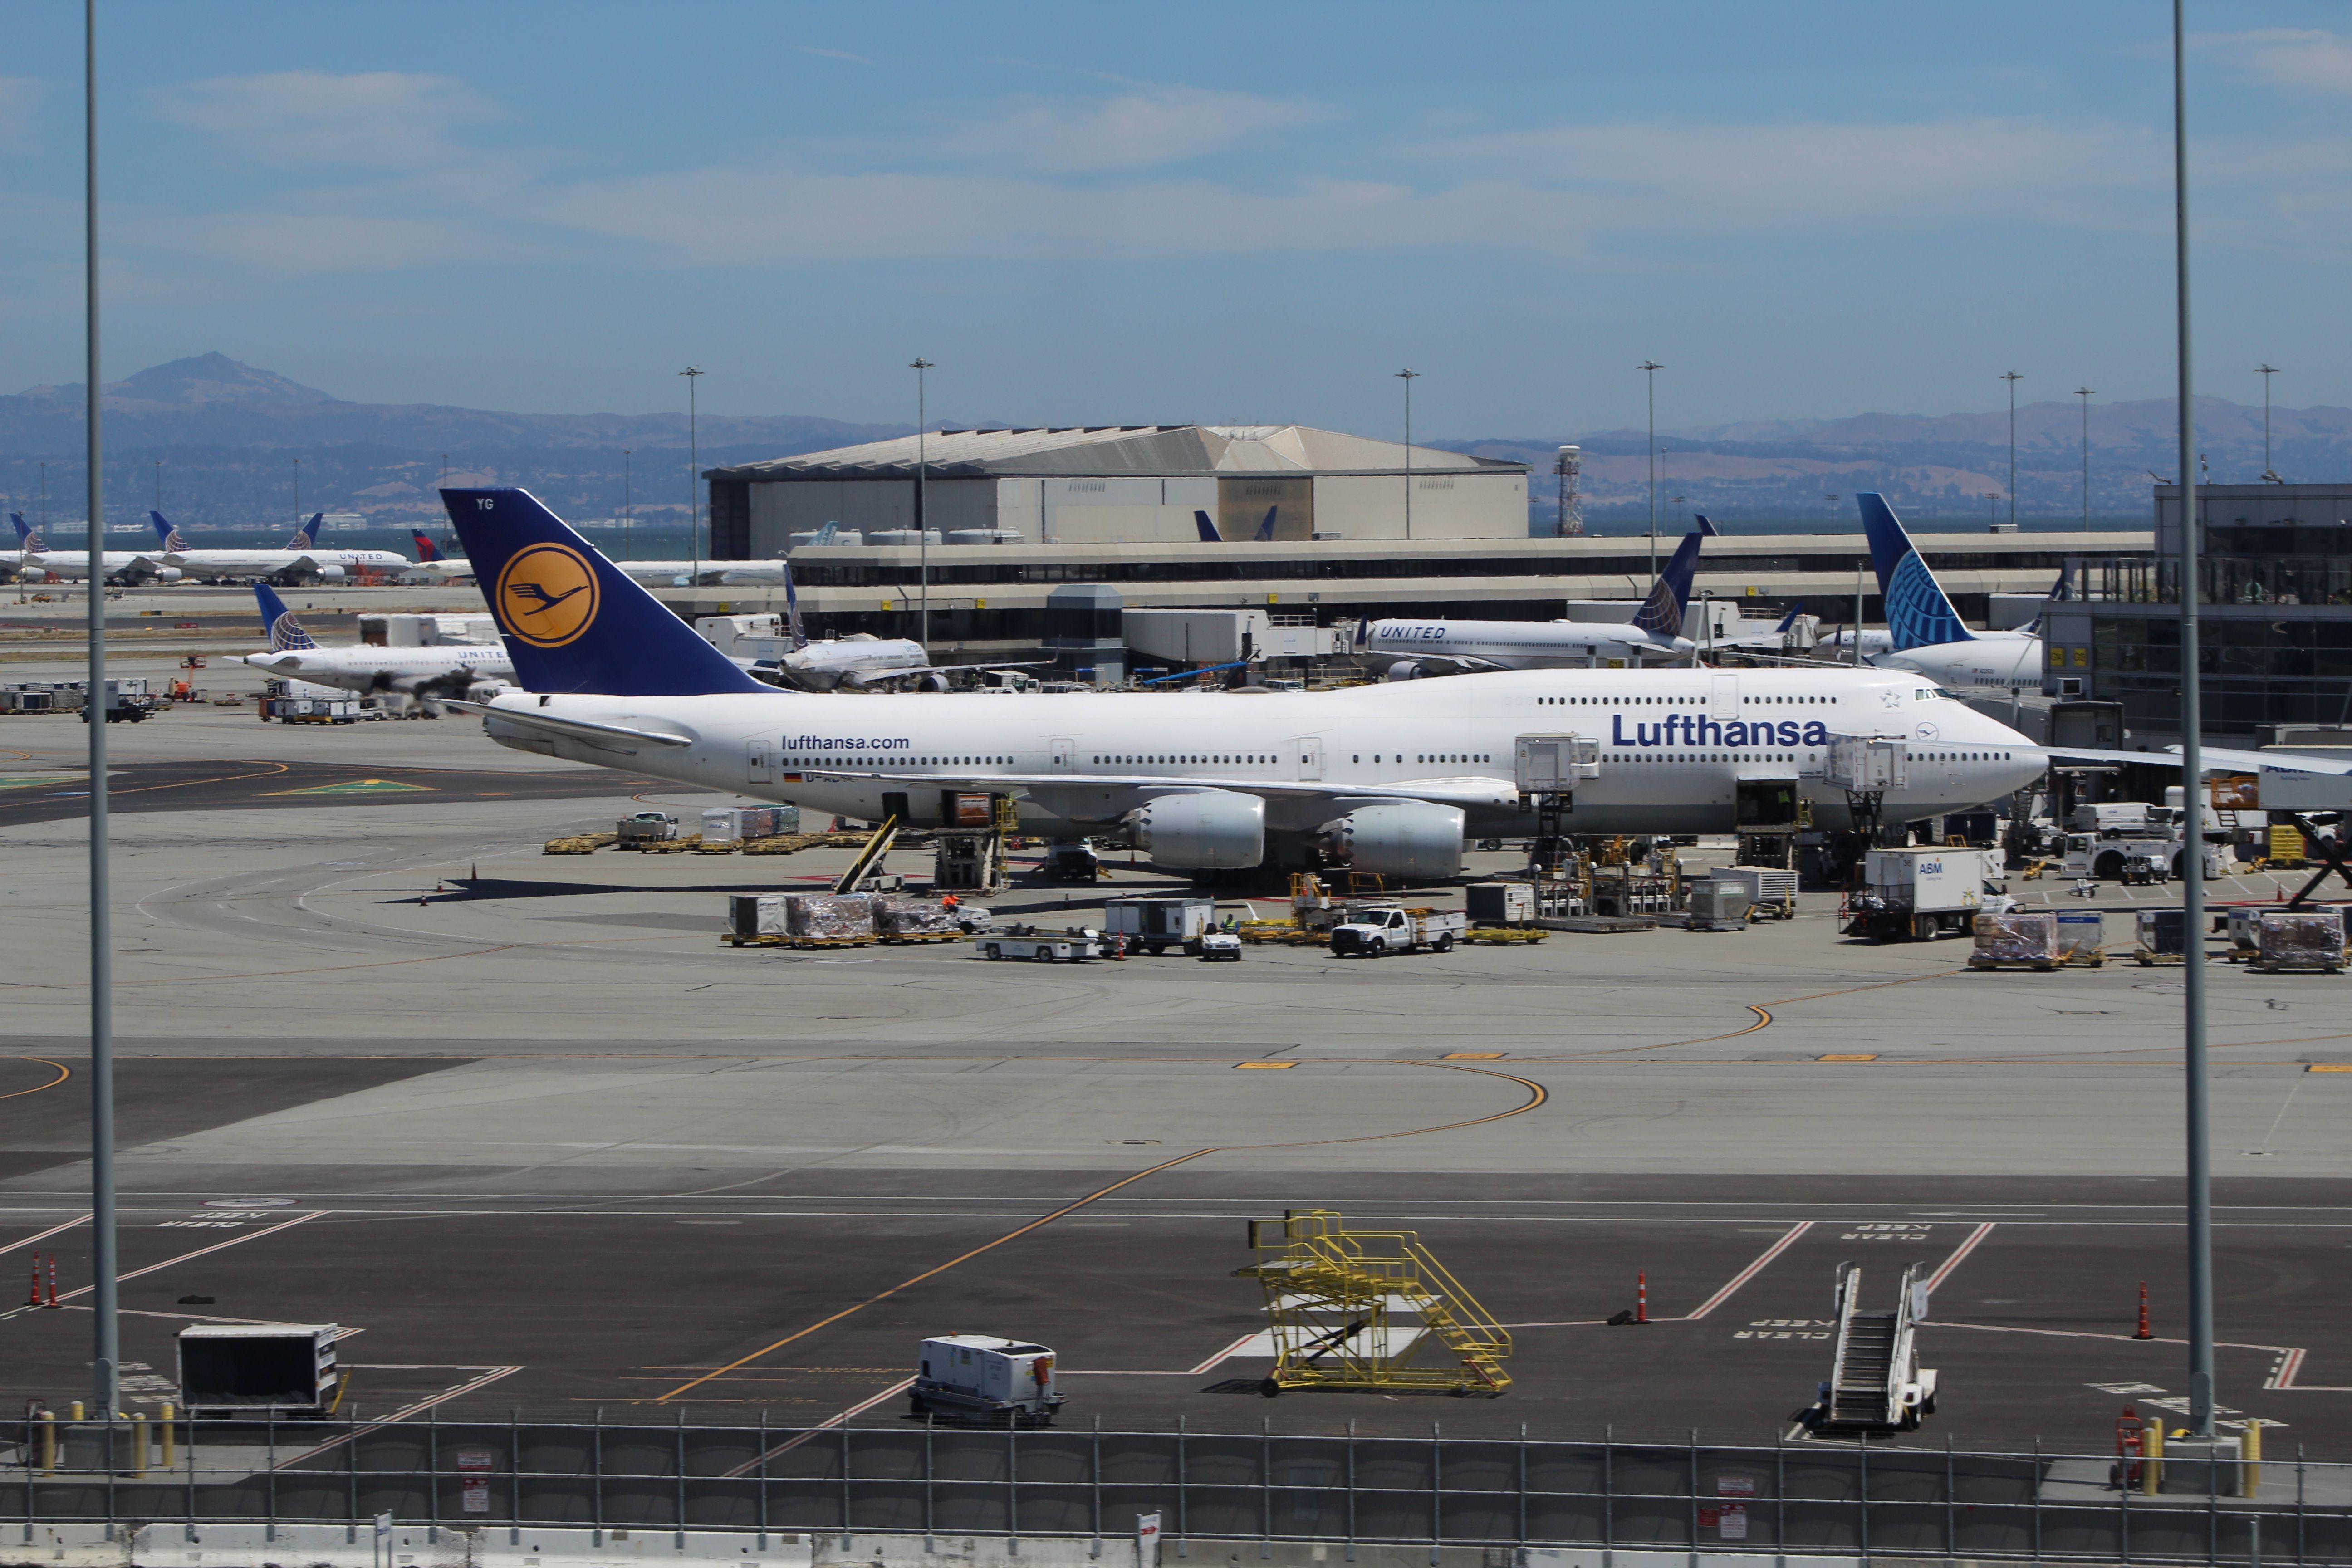 BOEING 747-8 (D-ABYG) - ==View in full for highest quality==br /A Lufthansa 747-830, D-ABYG taken from the San Francisco skytrain. We were moving so there was some motion blur as a tried to not fall over. 